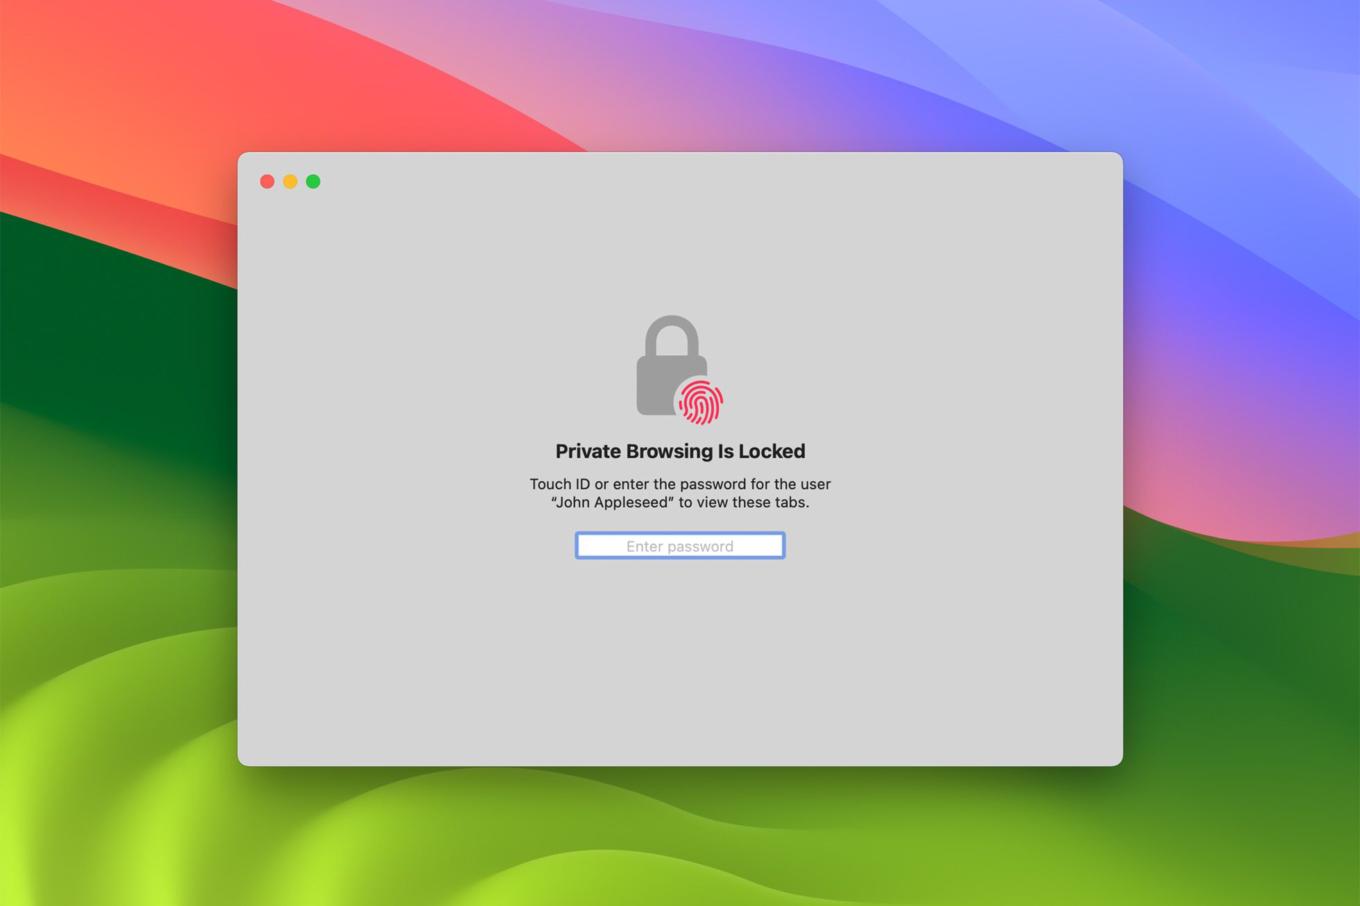 Safari Private Browser will lock automatically when not in use